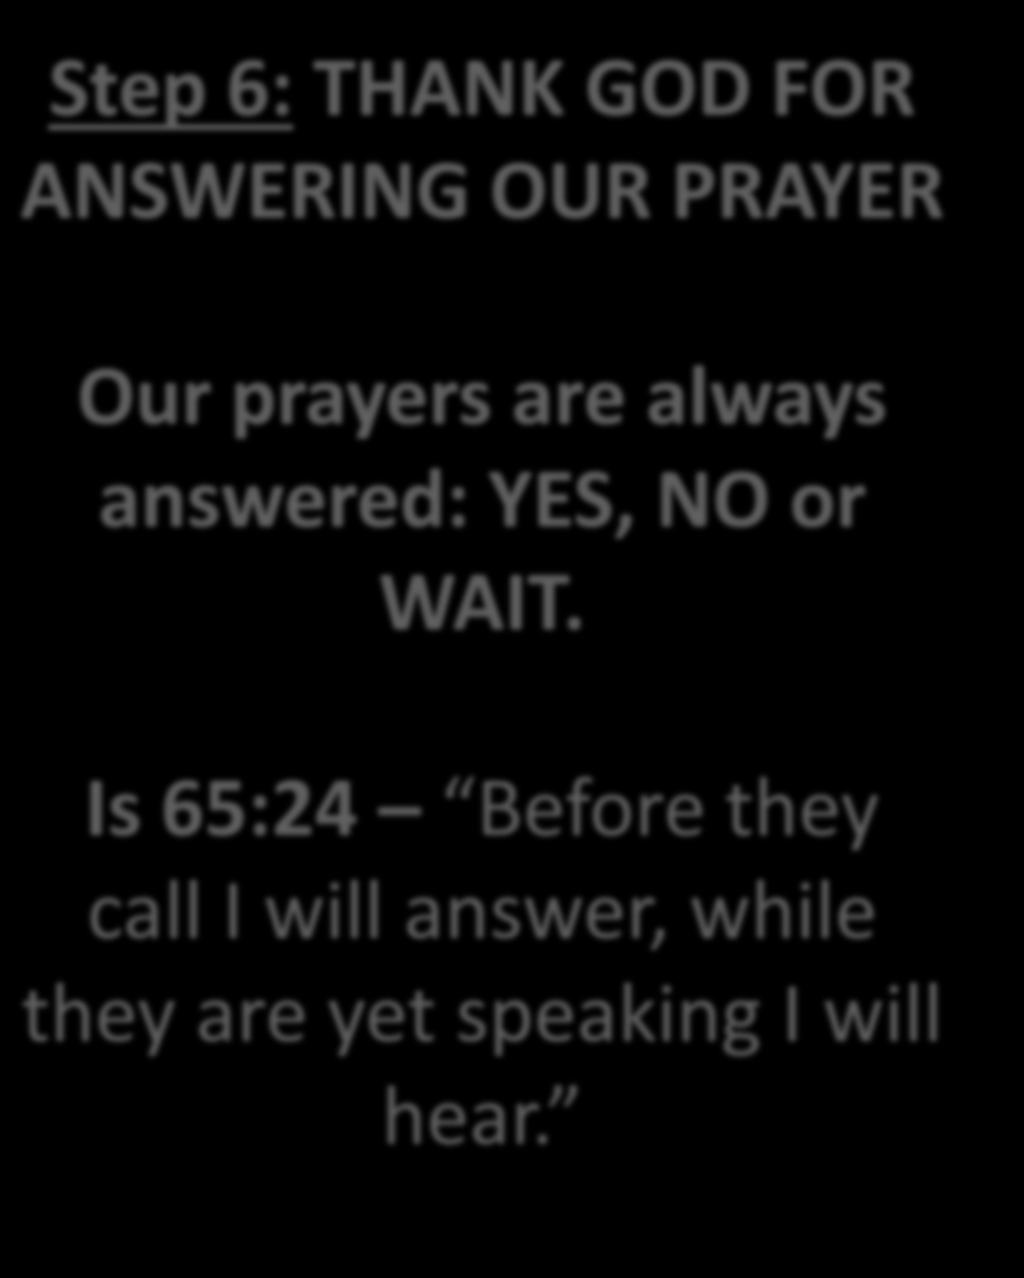 Step 6: THANK GOD FOR ANSWERING OUR PRAYER